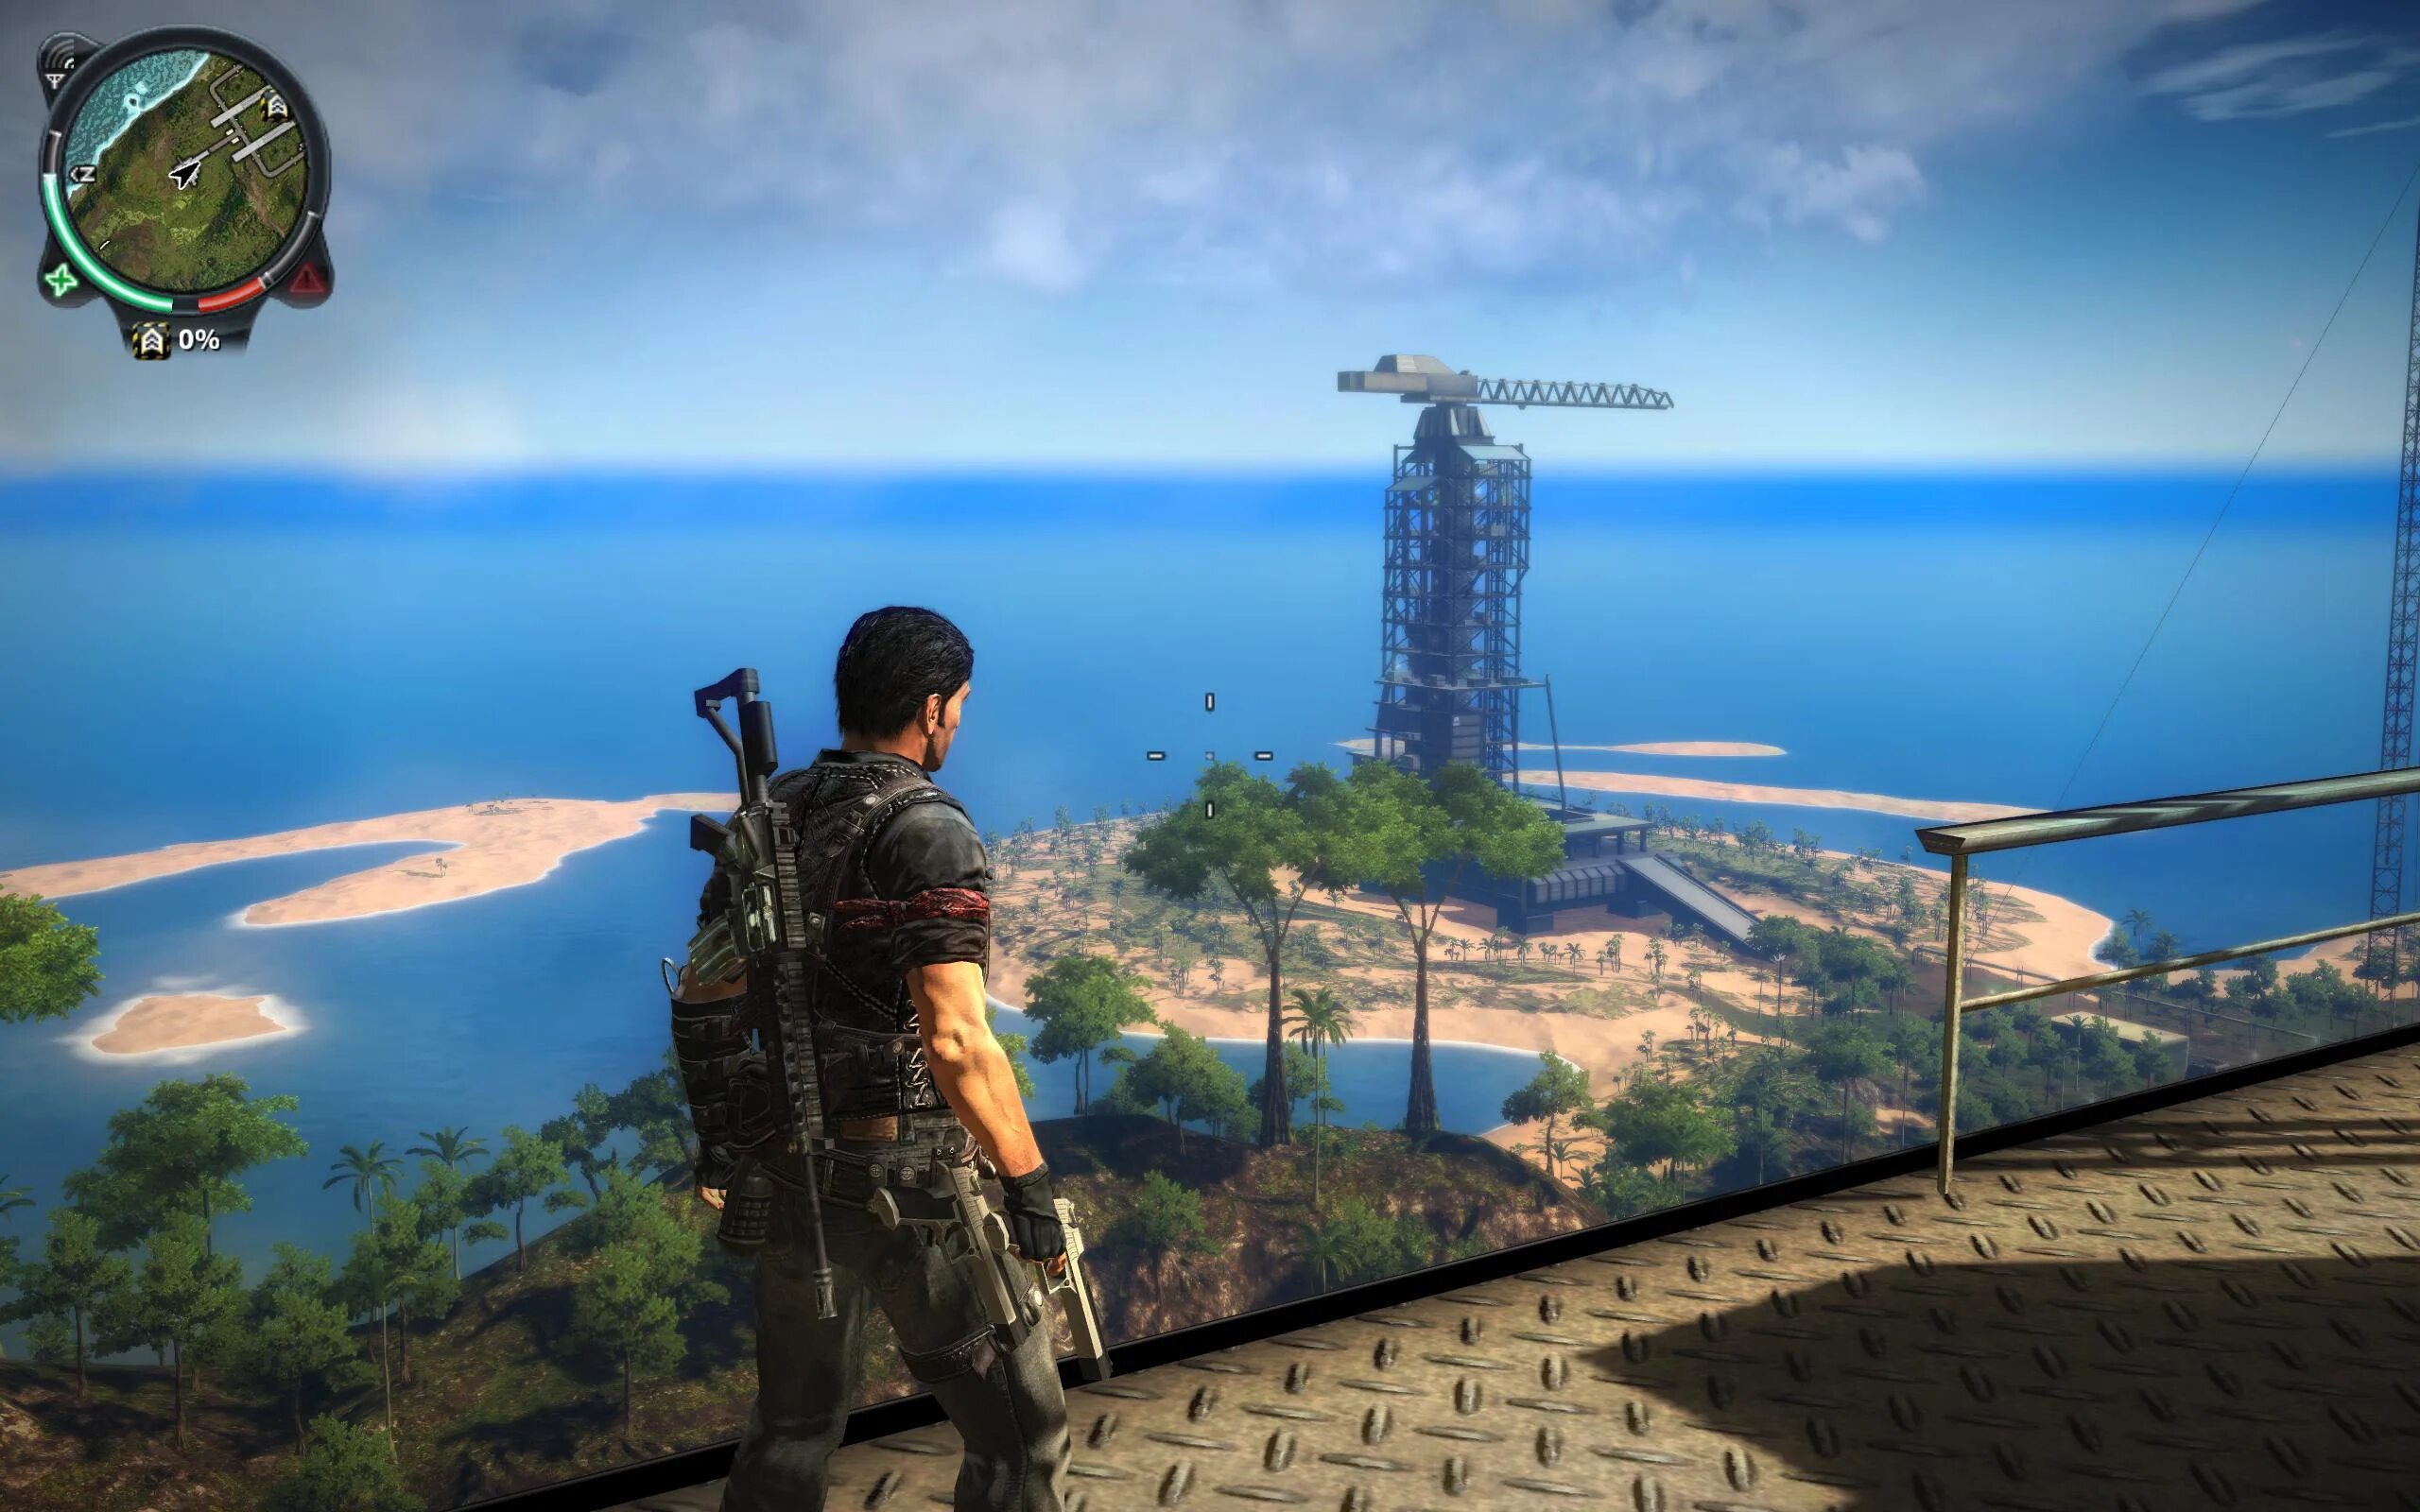 Игра just cause 2. Just cause 2 (Xbox 360). Just cause игра 1. Just cause 2 Multiplayer. Можно 2 игра такая